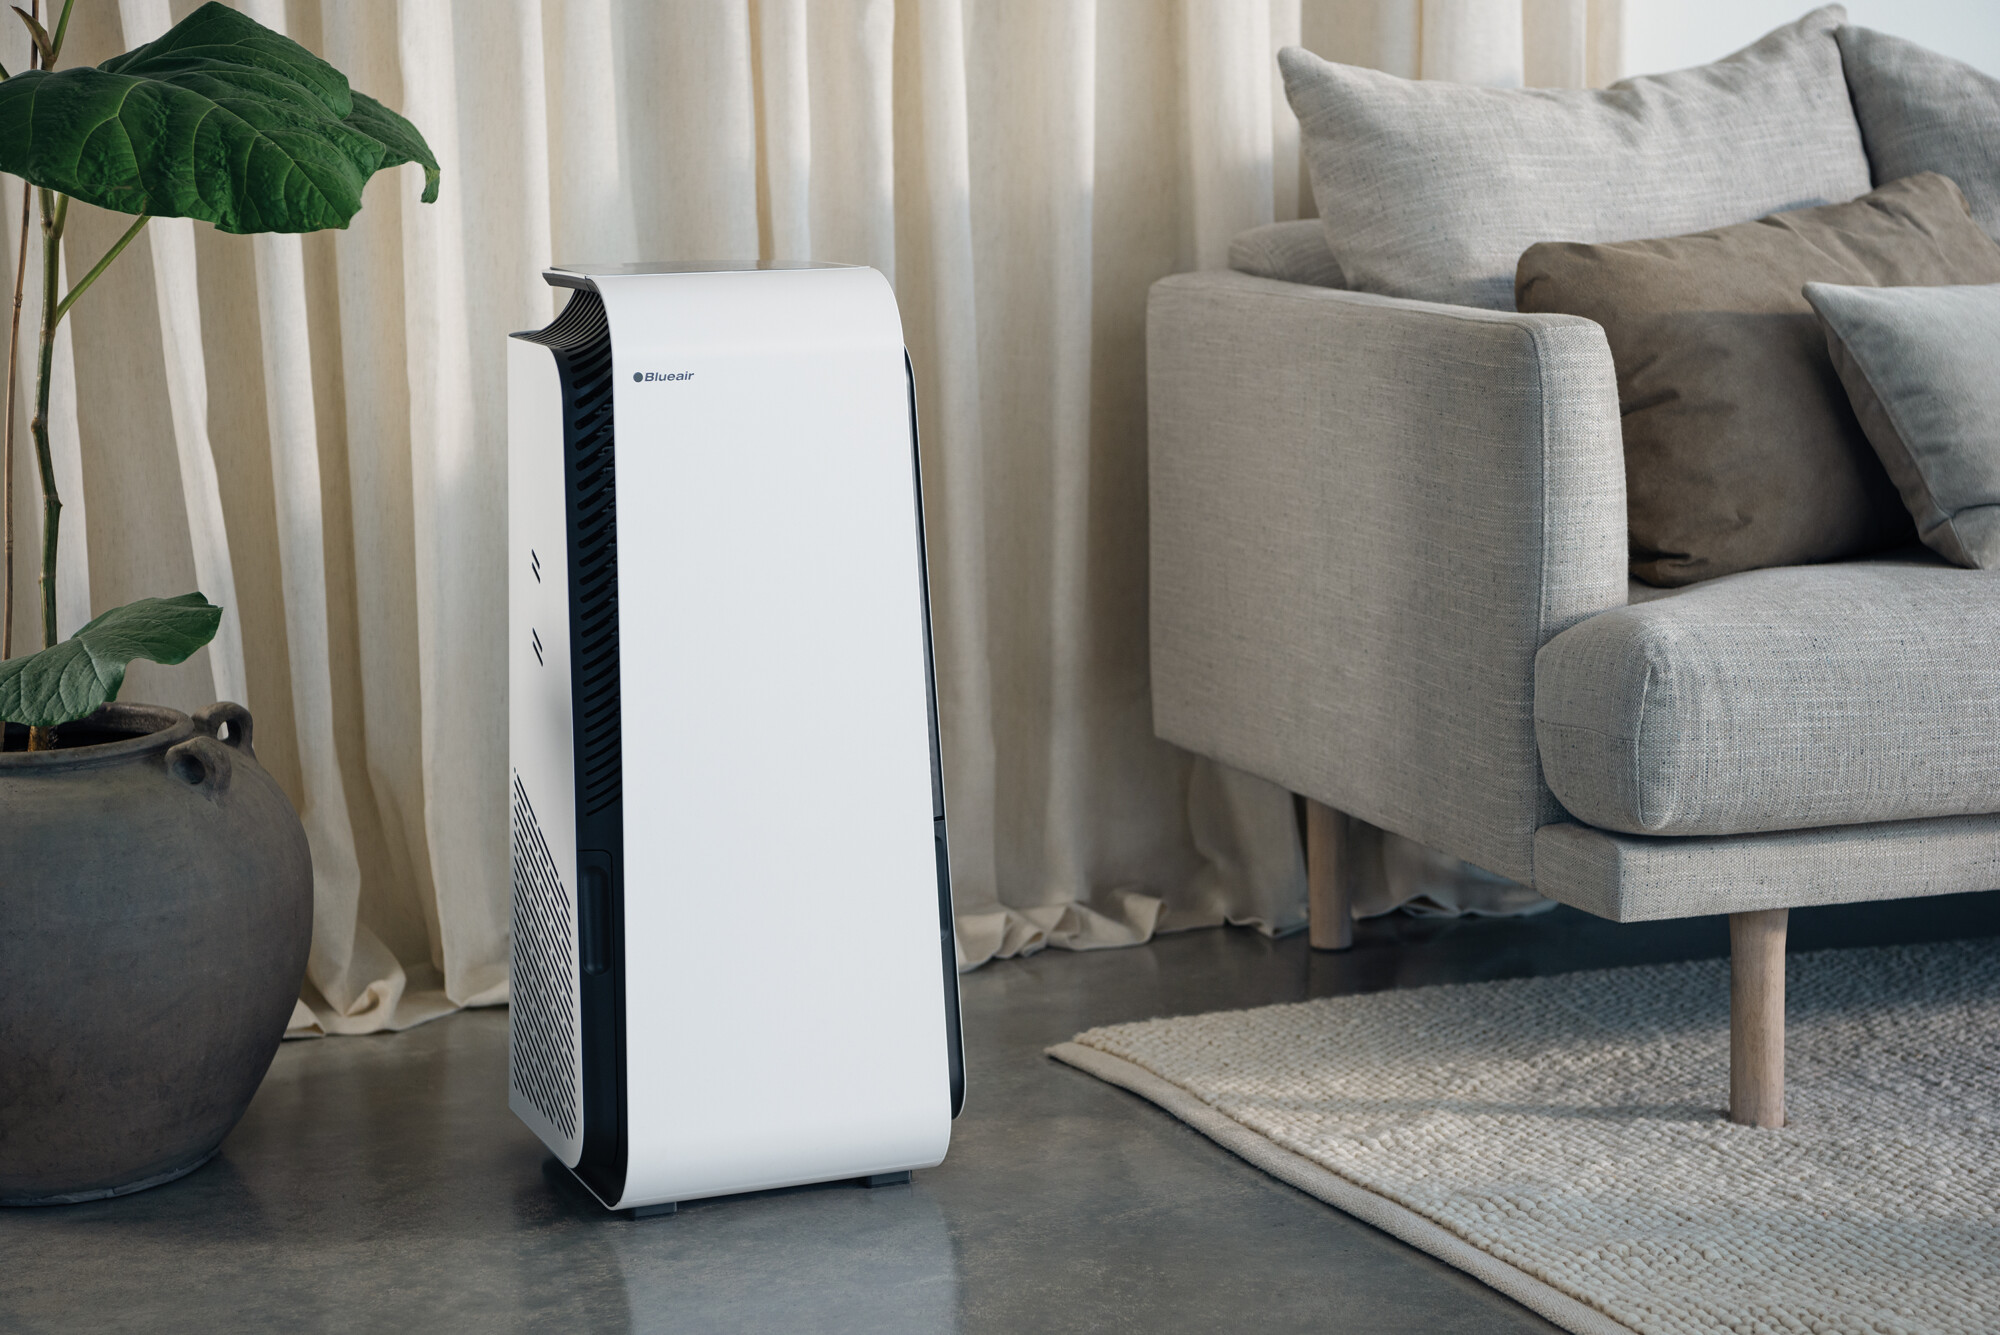 Blueair HealthProtect 7470i Air Purifier protects your health 24/7.